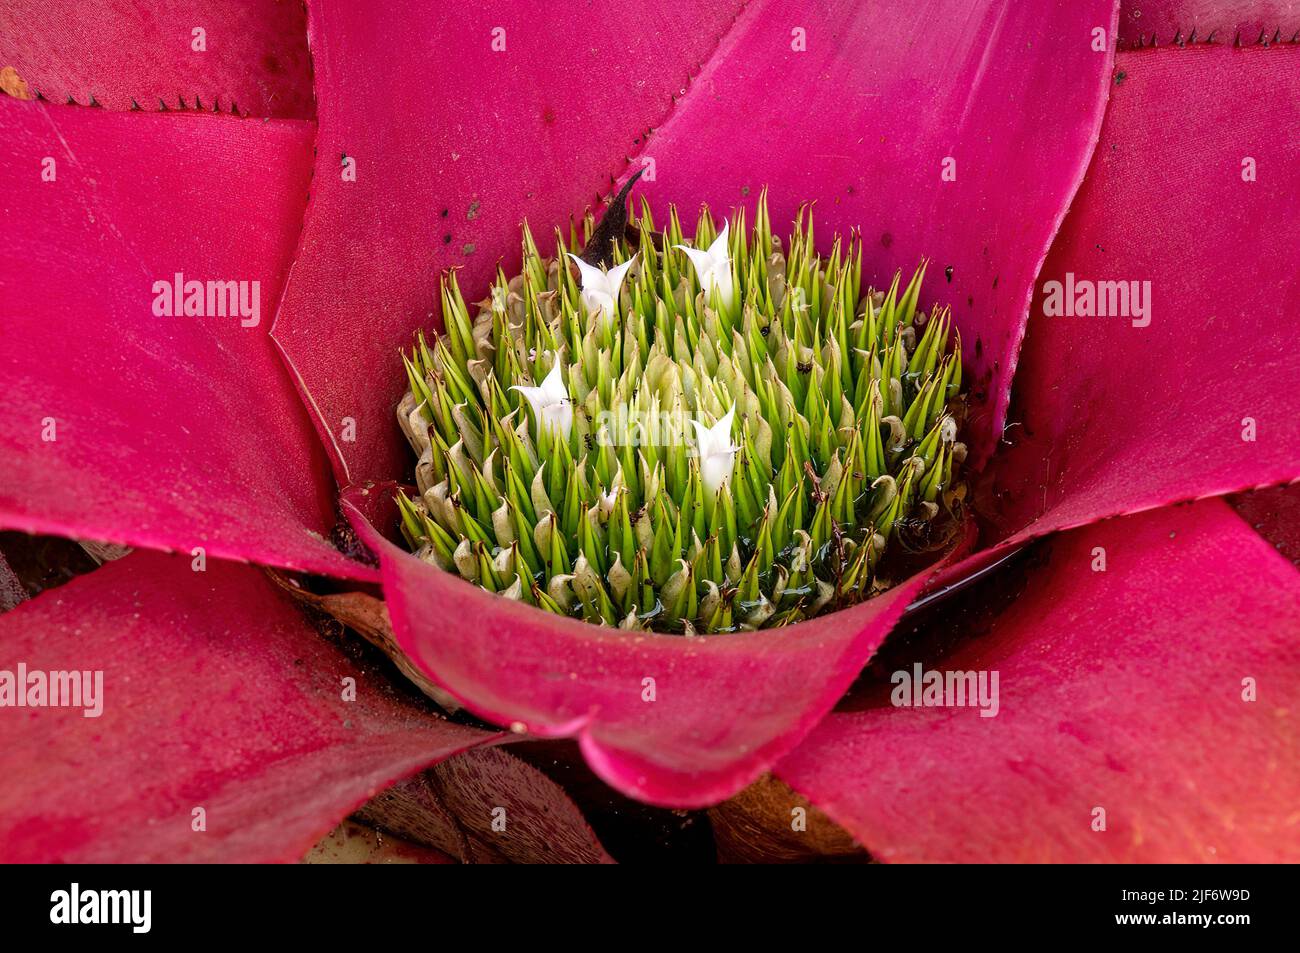 Sydney Australia, blushing bromeliad with pink leaves and white flowers starting to open Stock Photo